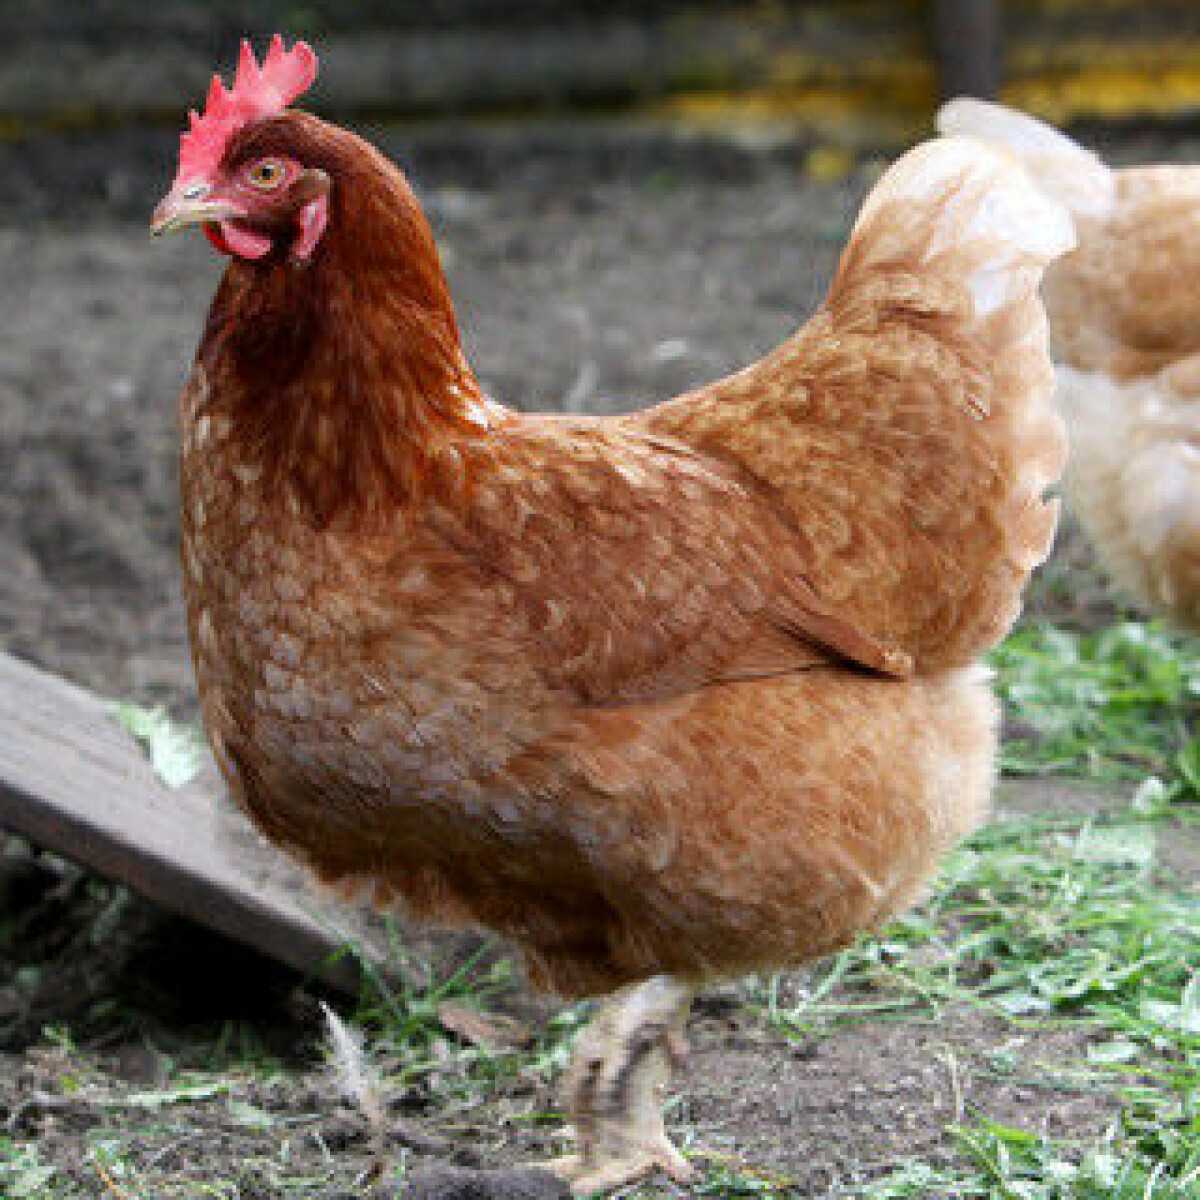 Chickens cause serious infections in humans